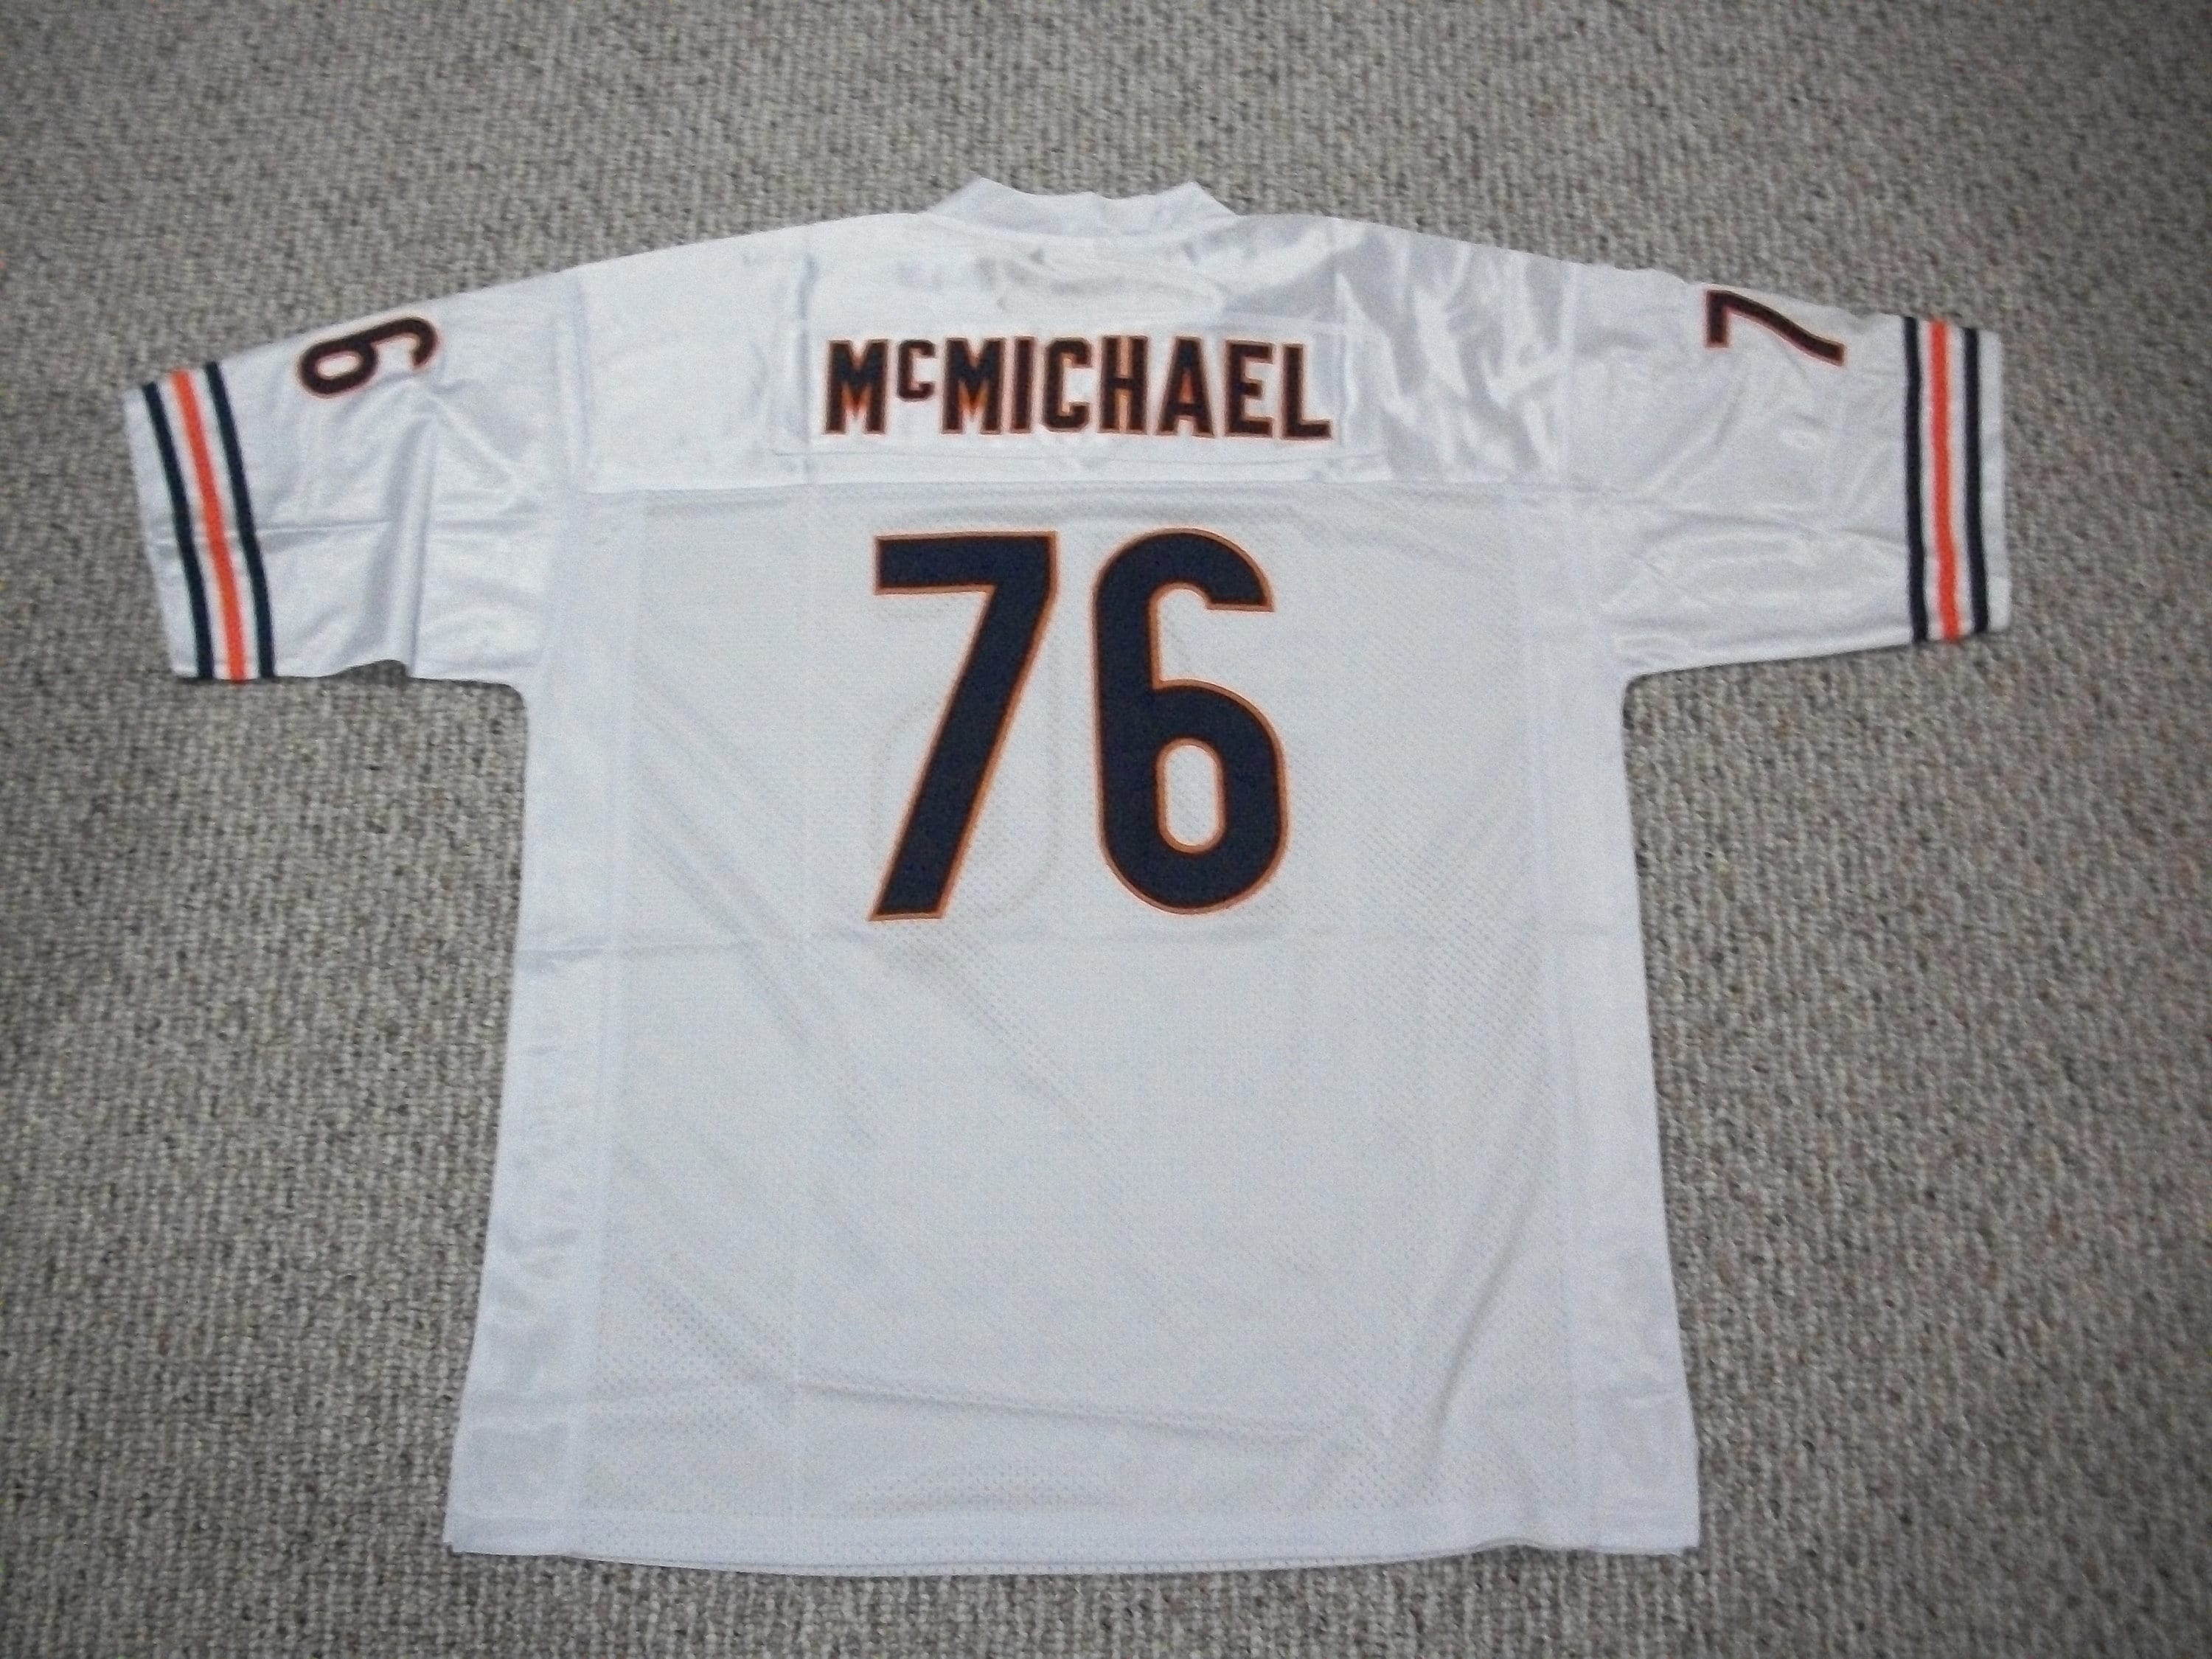 Jerseyrama Unsigned Steve Mcmichael Jersey #76 Chicago Custom Stitched Blue Football New No Brands/Logos Sizes S-3xl, Size: Small